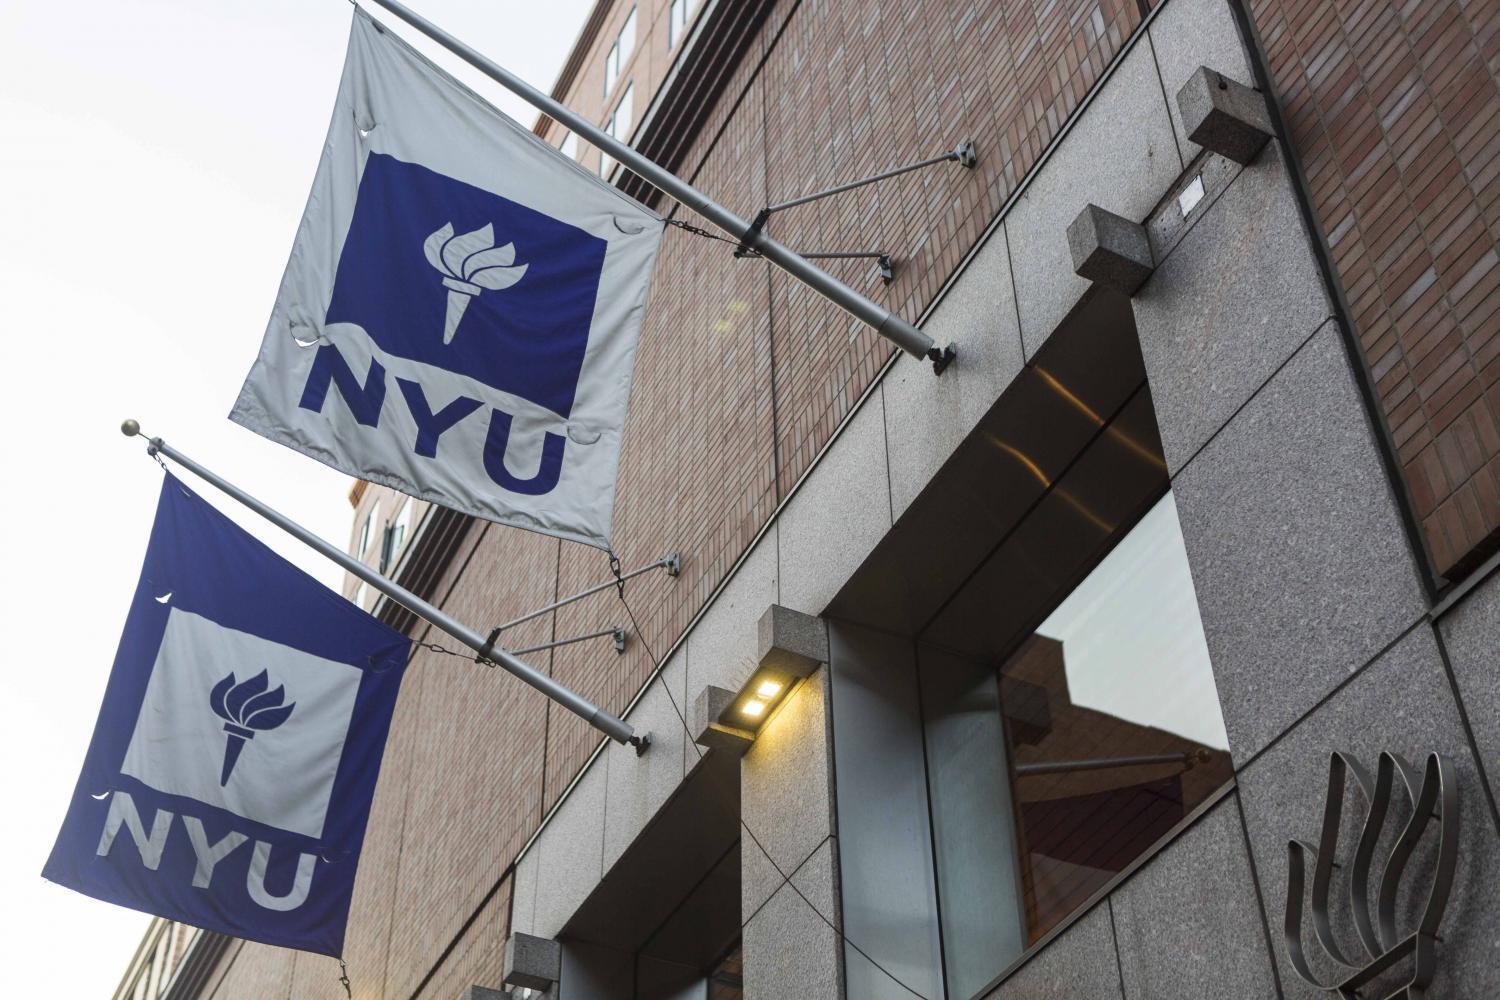 The+union+that+represents+a+number+of+NYU+staff+will+be+negotiating+contracts+with+the+university+on+Sept.+18.+%0A